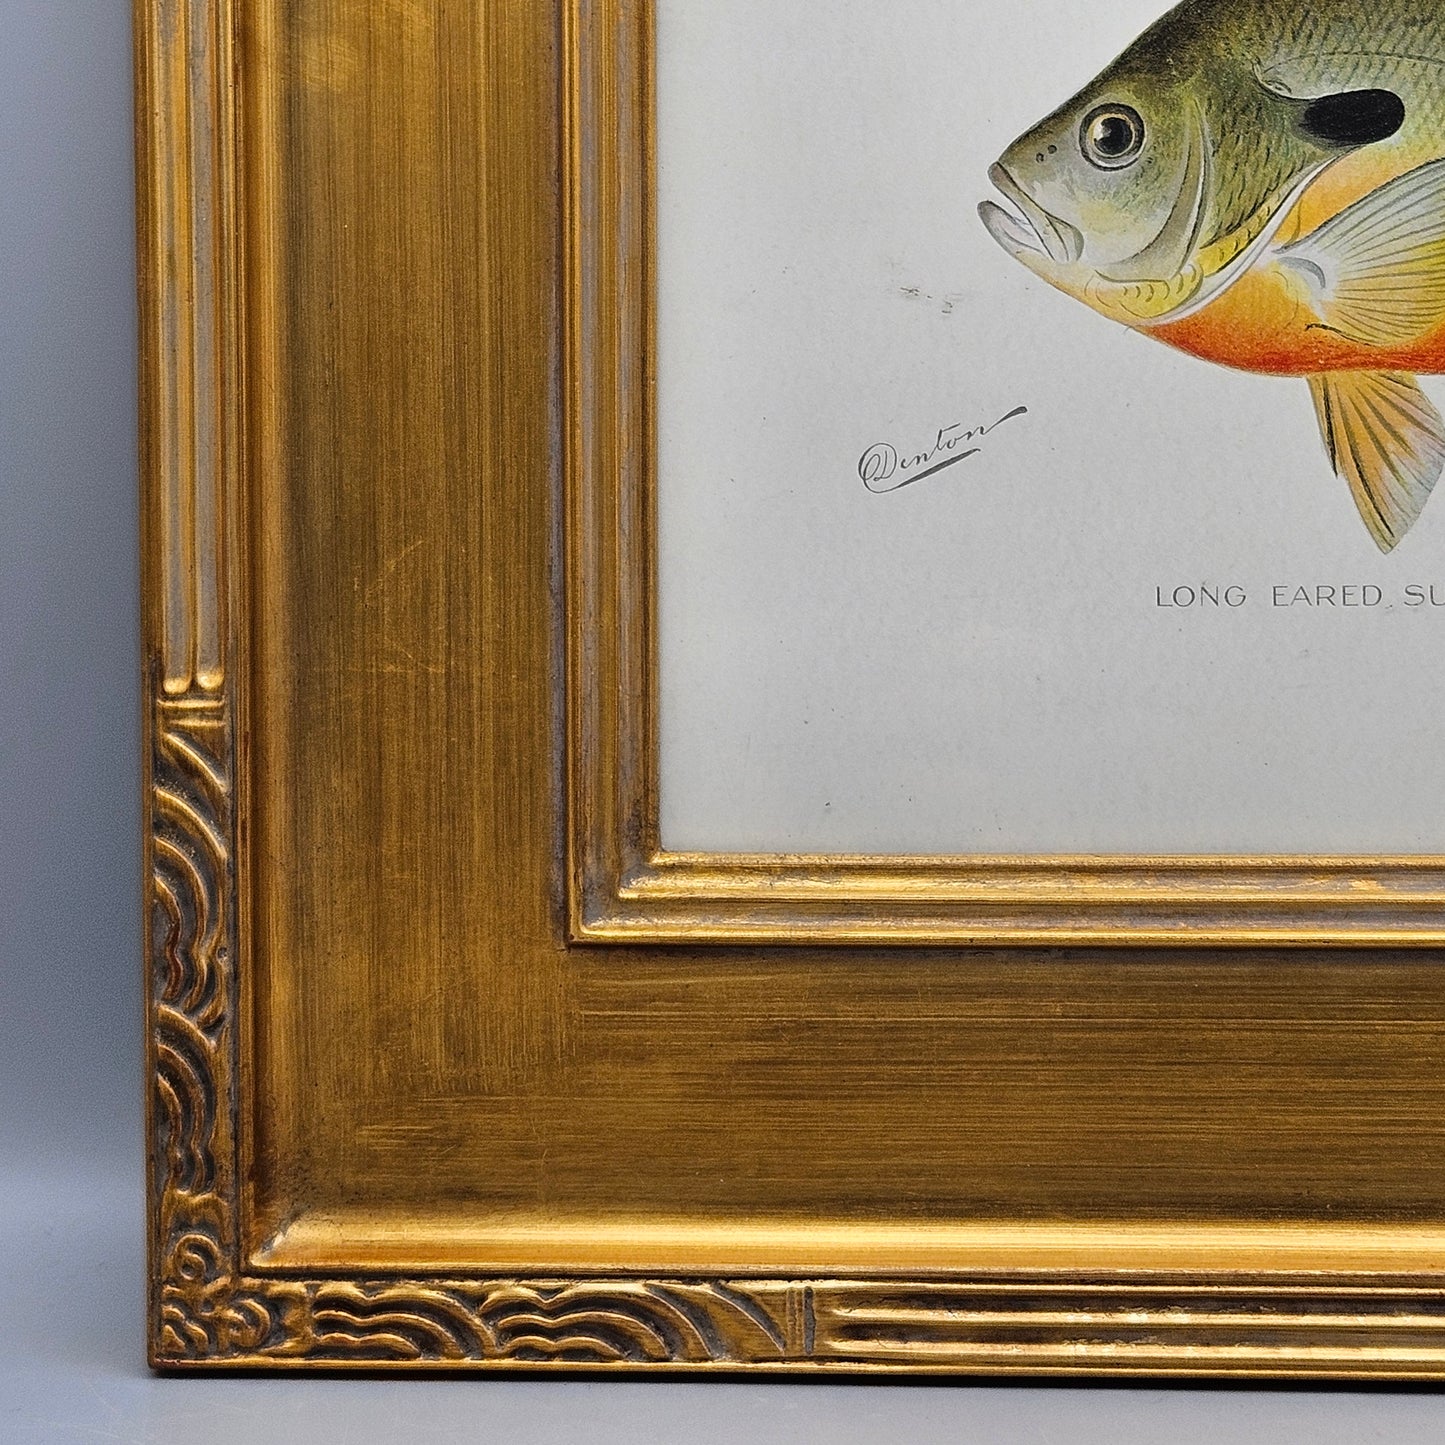 Antique Long Eared Sunfish Framed Hand Painted Fish Lithograph